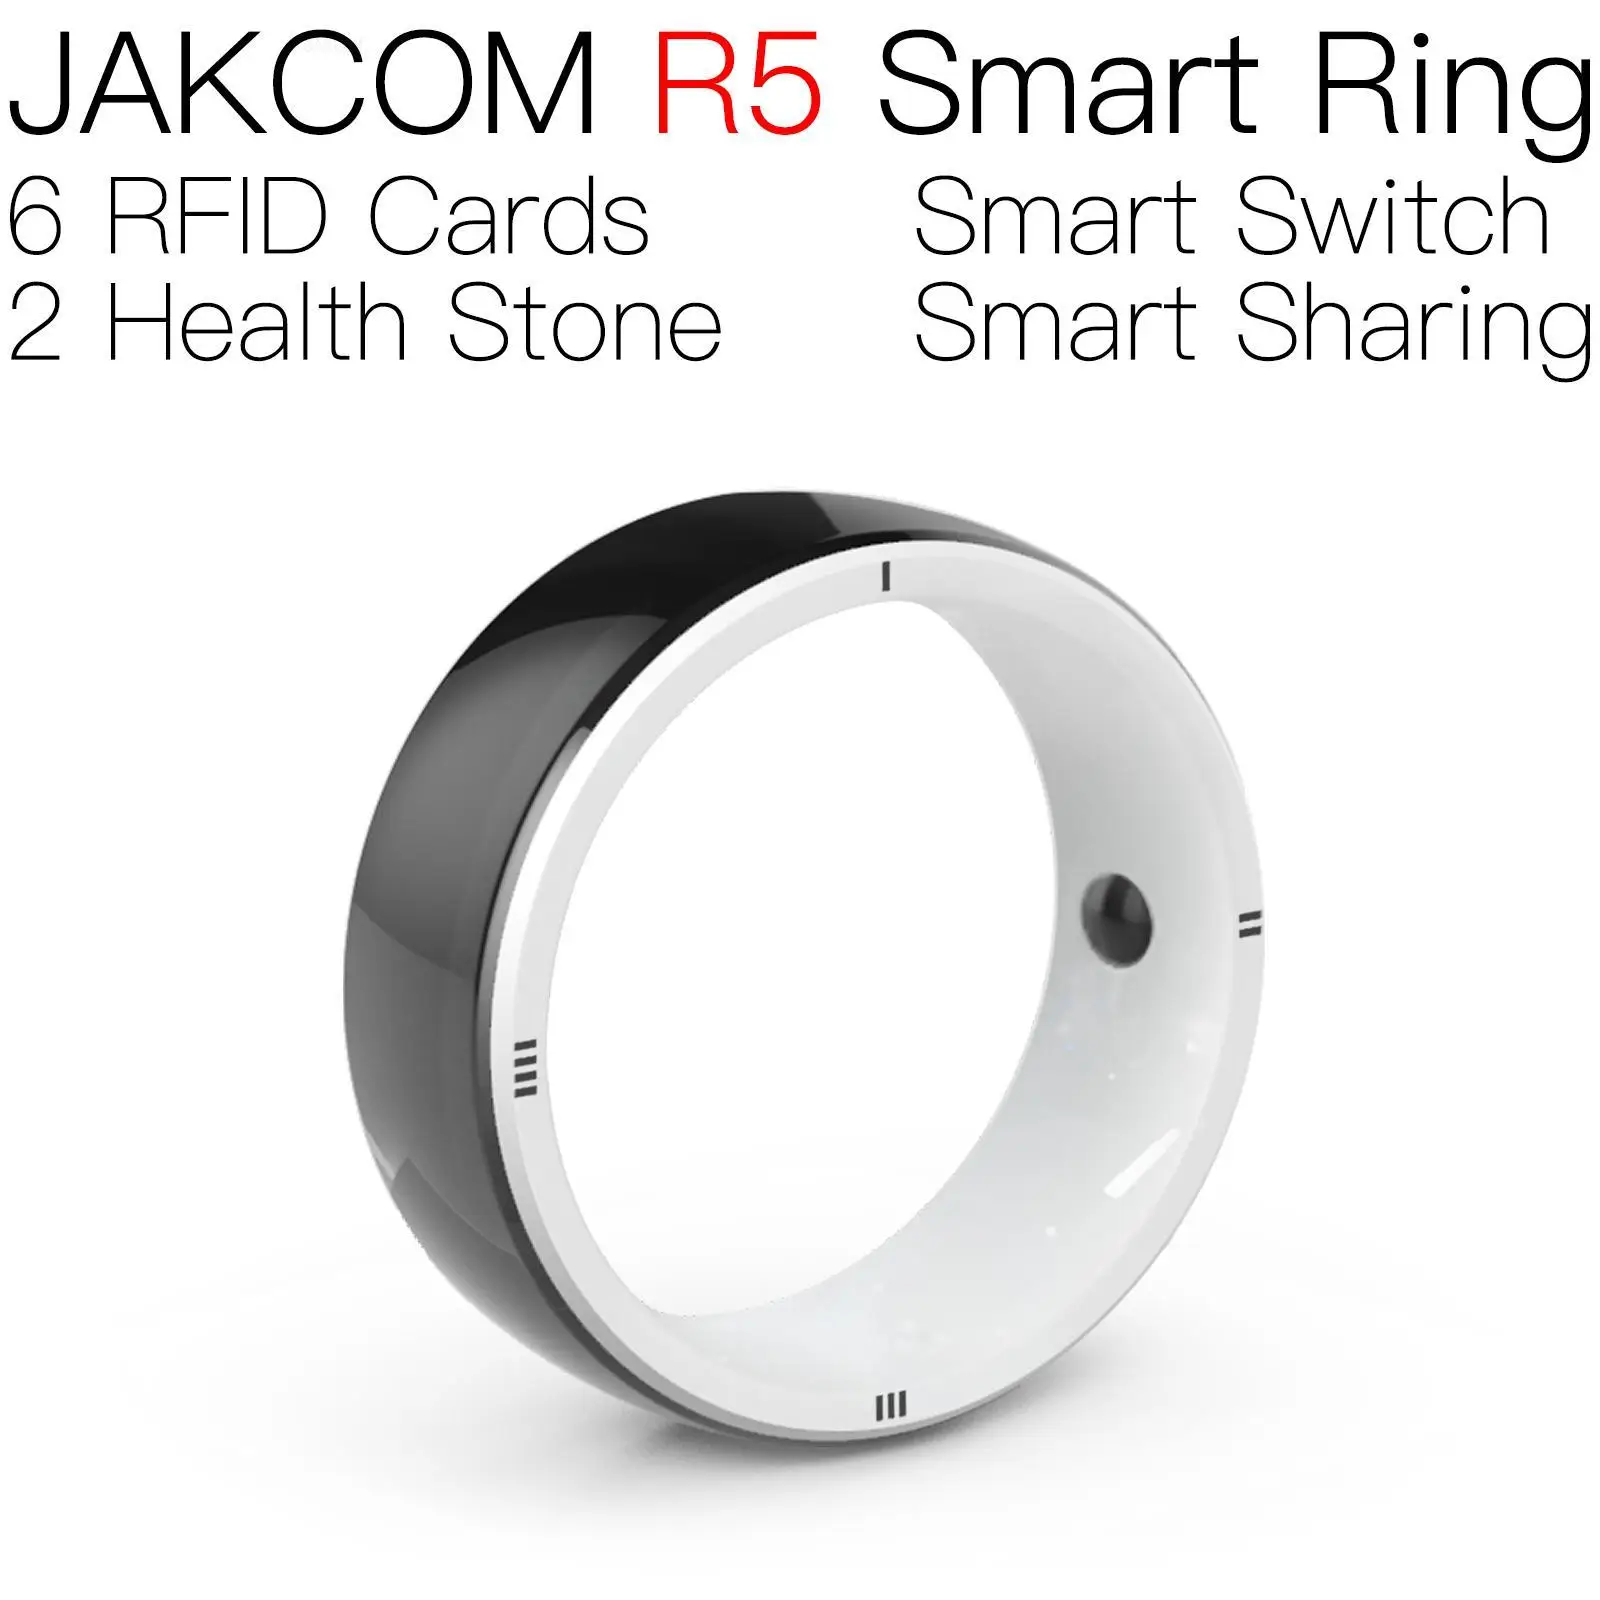 

JAKCOM R5 Smart Ring better than uid s50 7 bytes 1k nfc coil dual frequency rfid chip integrated into id 125khz em4305